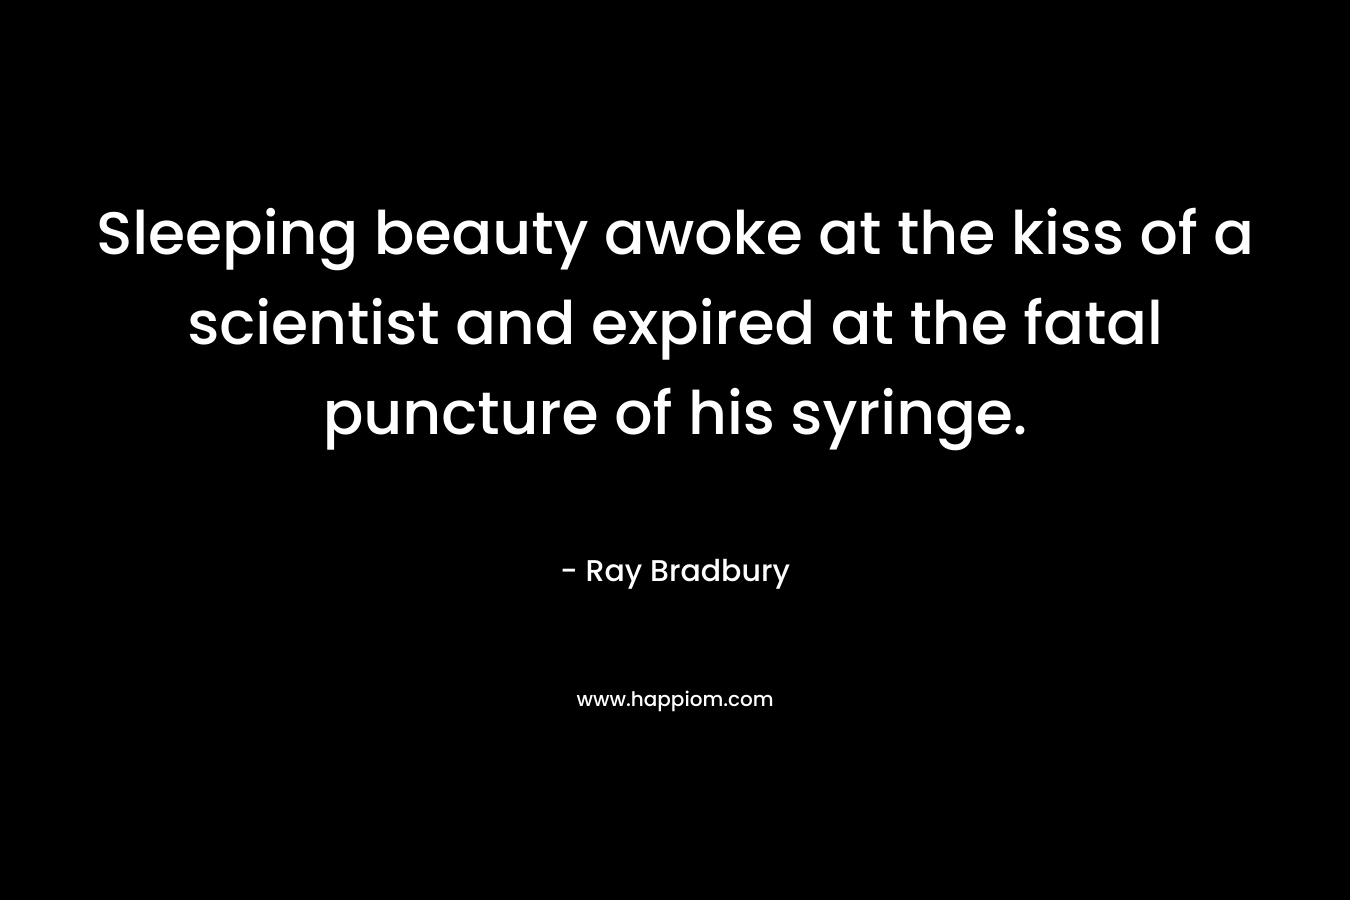 Sleeping beauty awoke at the kiss of a scientist and expired at the fatal puncture of his syringe. – Ray Bradbury